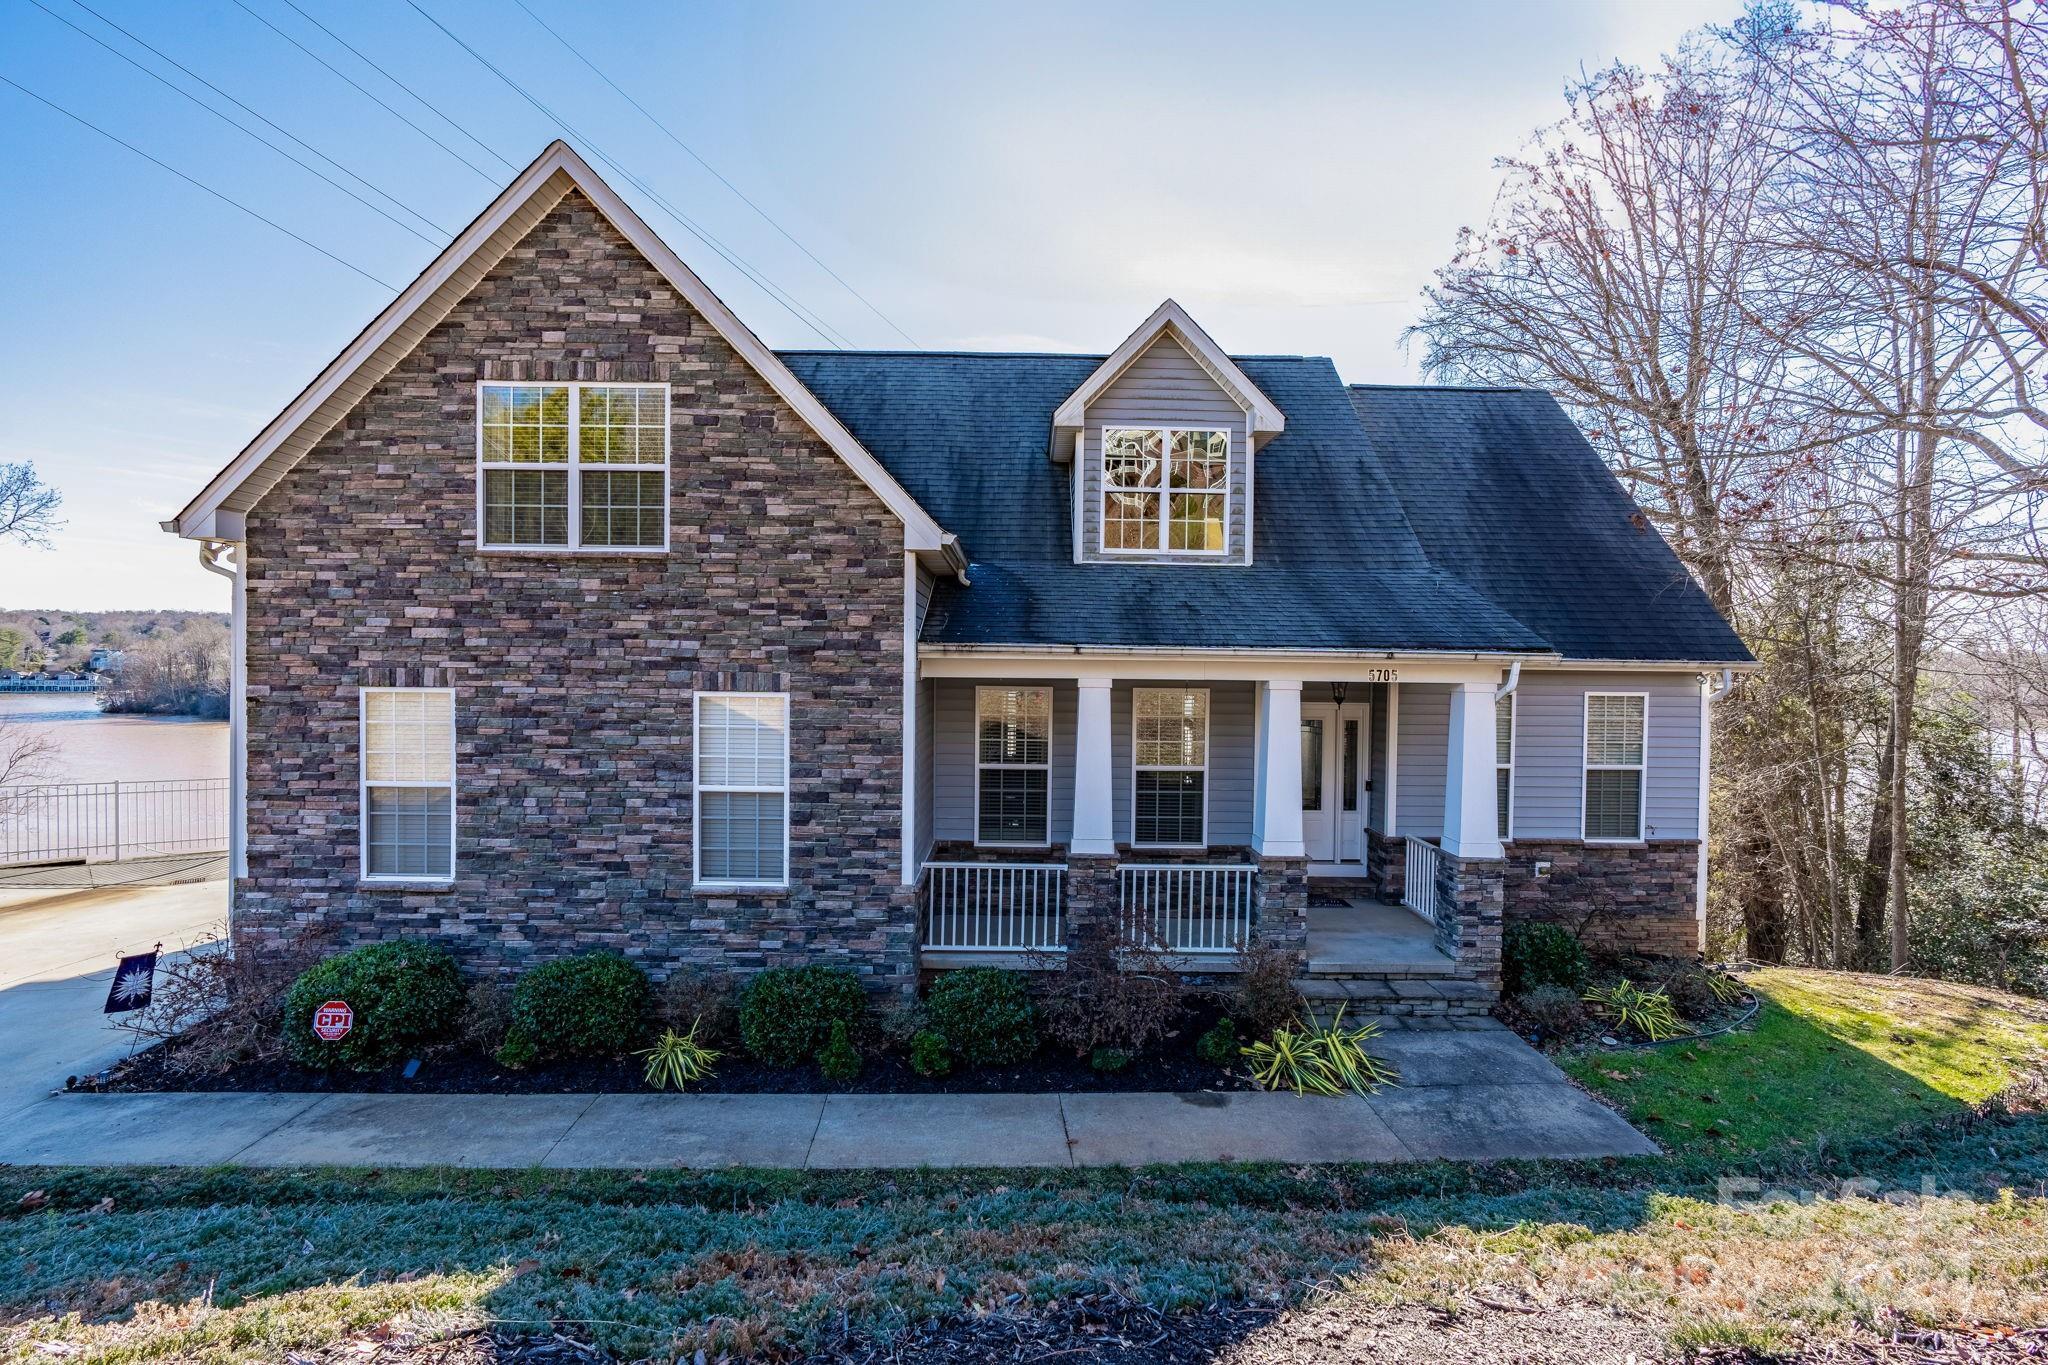 Photo one of 5705 Crown Ter Hickory NC 28601 | MLS 4099902